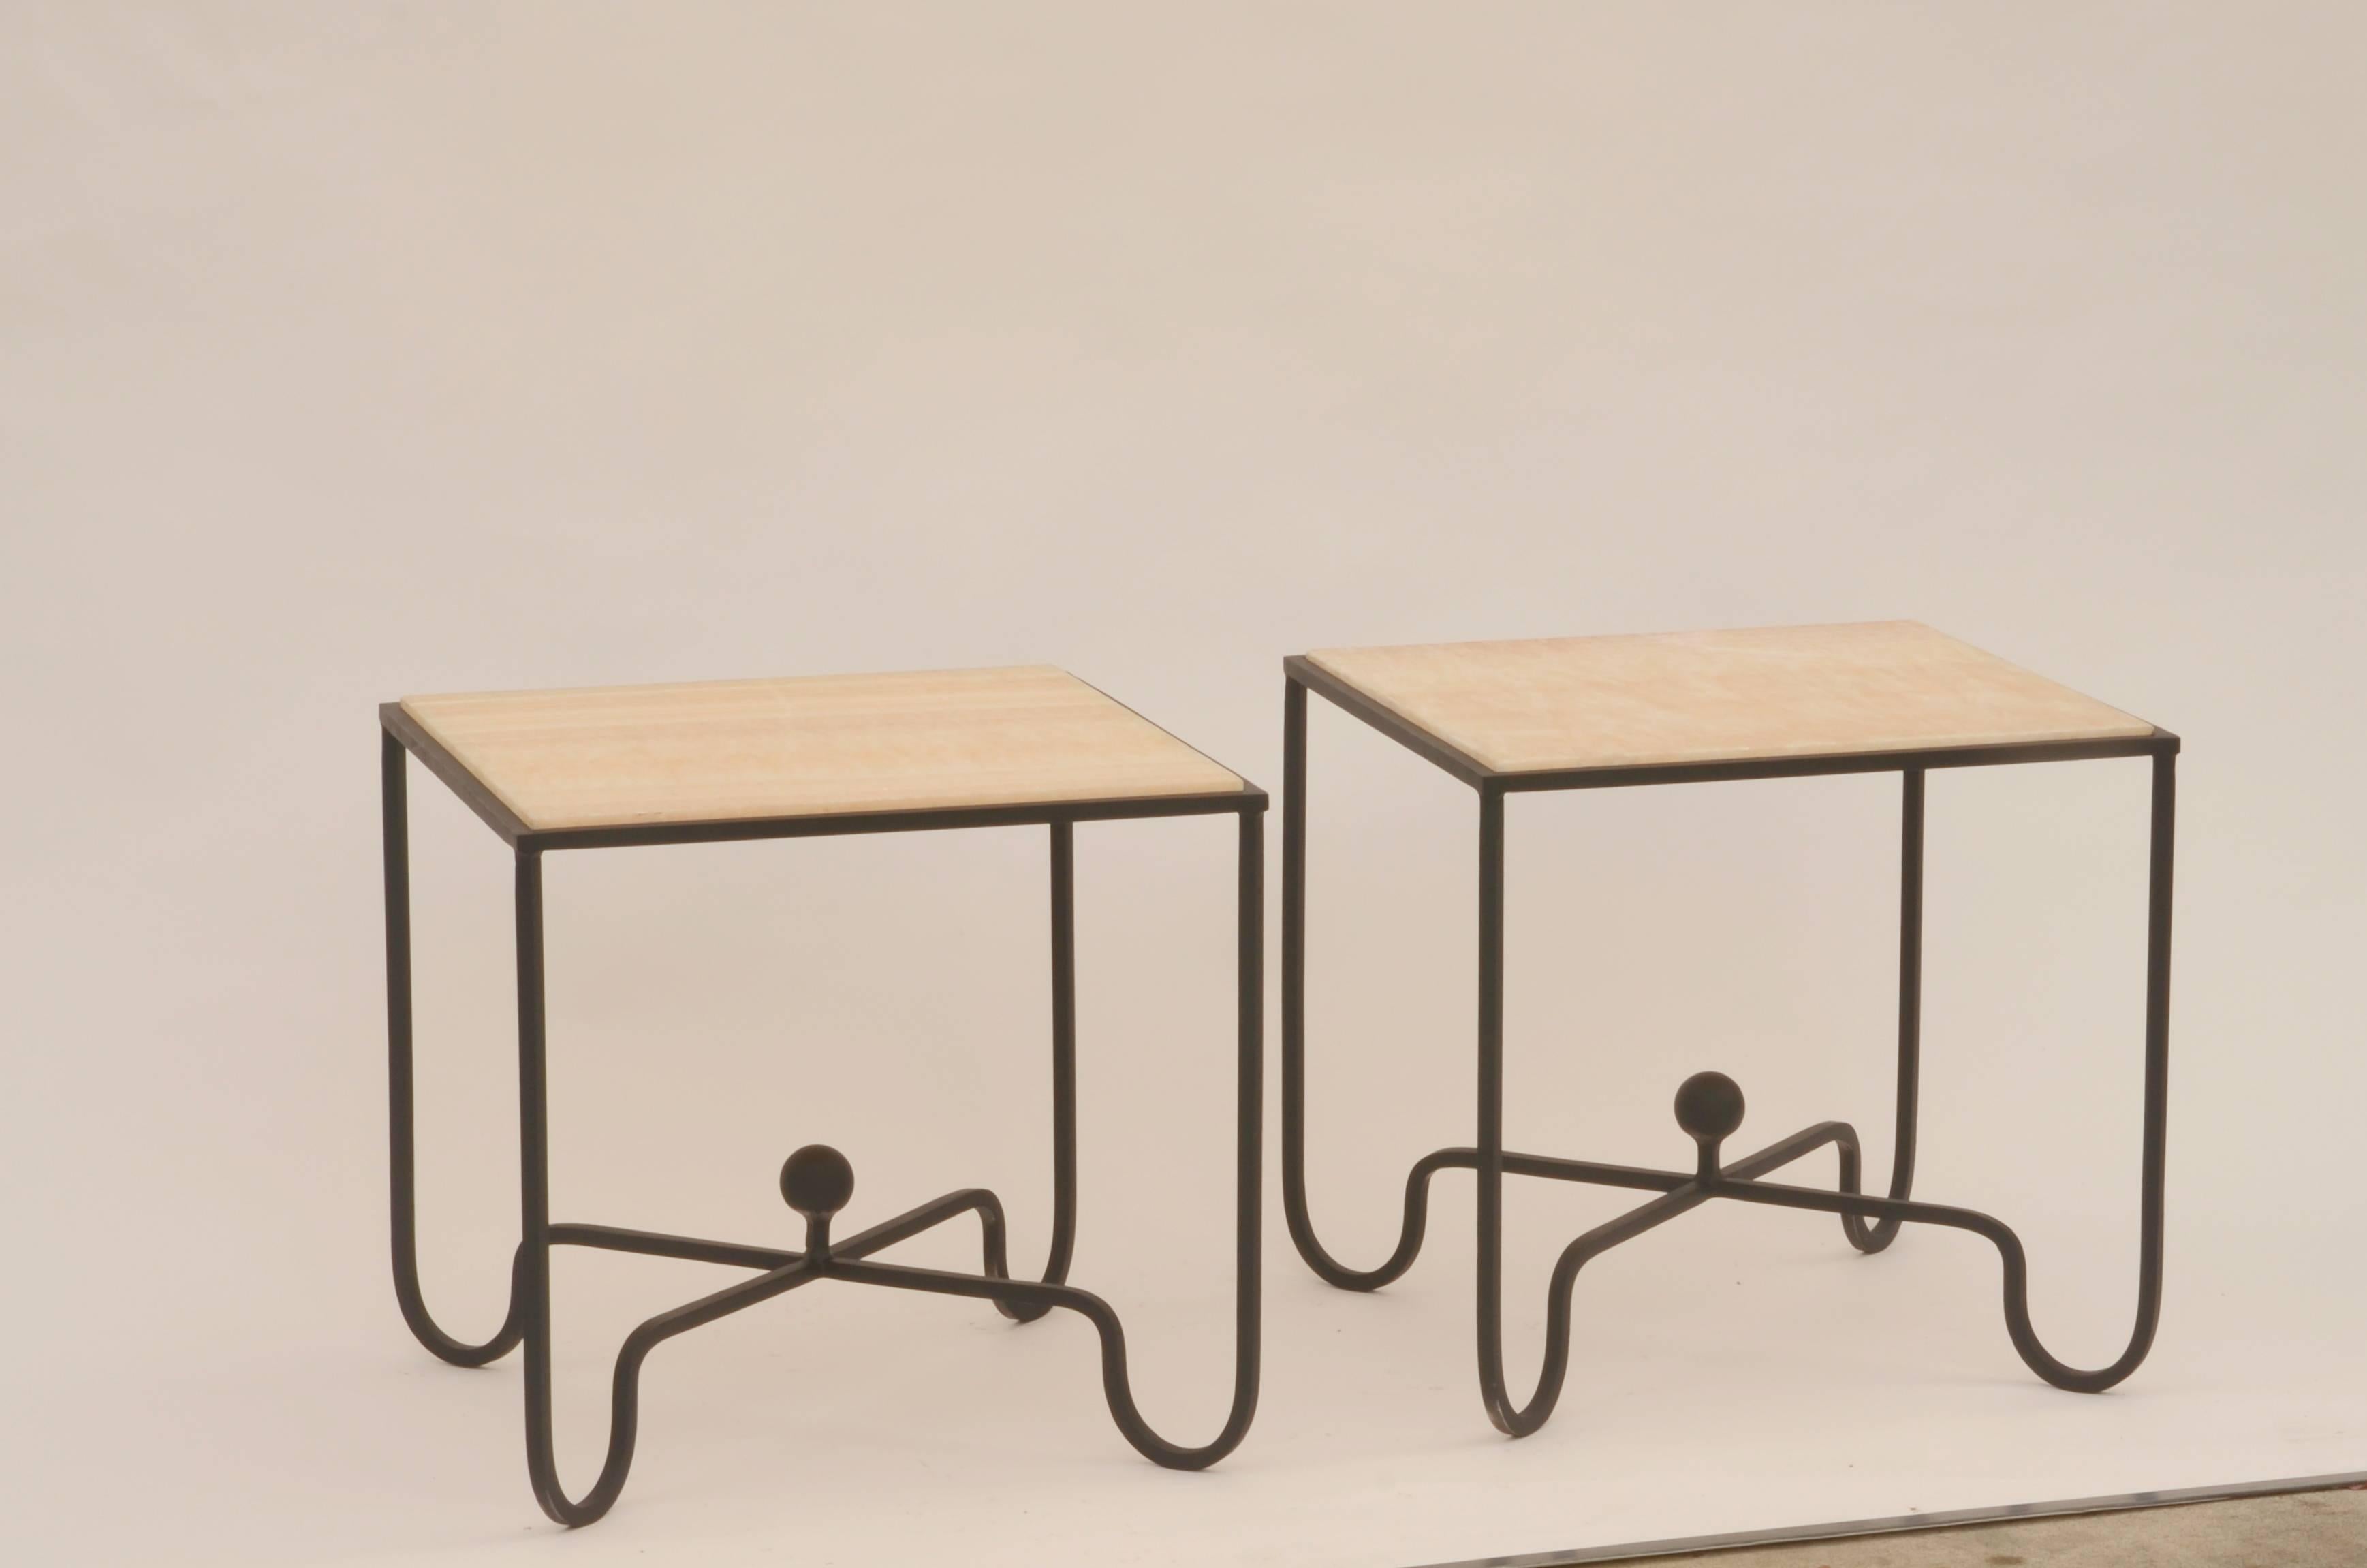 Pair of 'Entretoise' wrought iron and onyx side tables by Design Frères. Great as end tables or as a two-part coffee table. In the style of Mathieu Matégot.